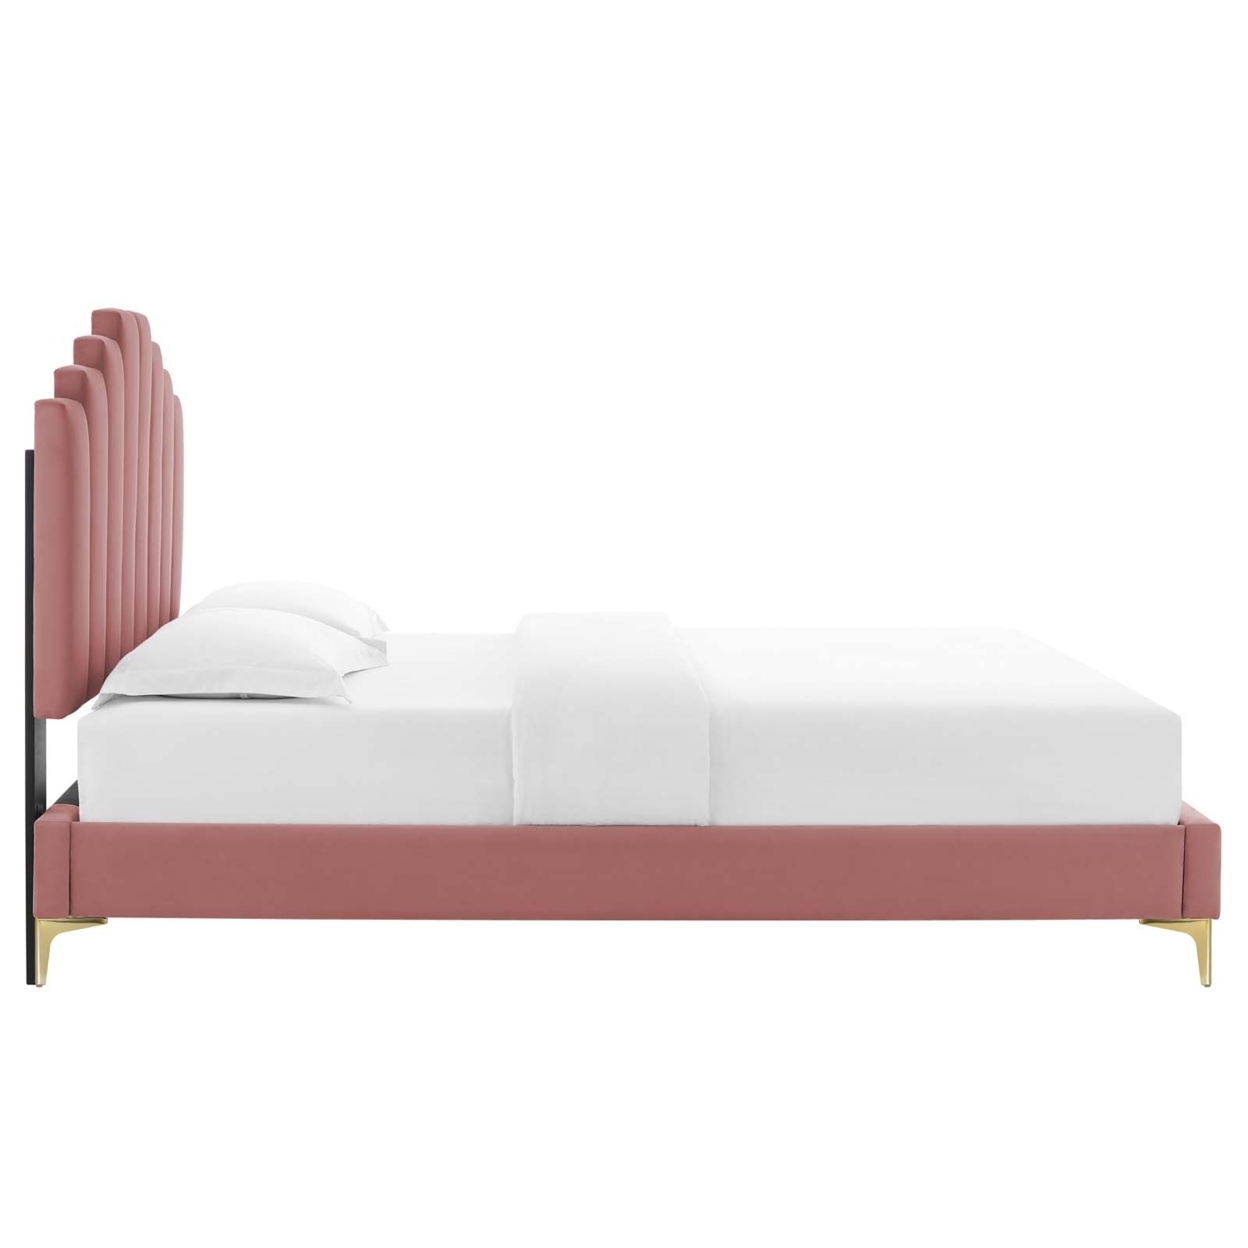 Channel Tufted Twin Platform Bed With Gold Metal Leg, Pink, Saltoro Sherpi